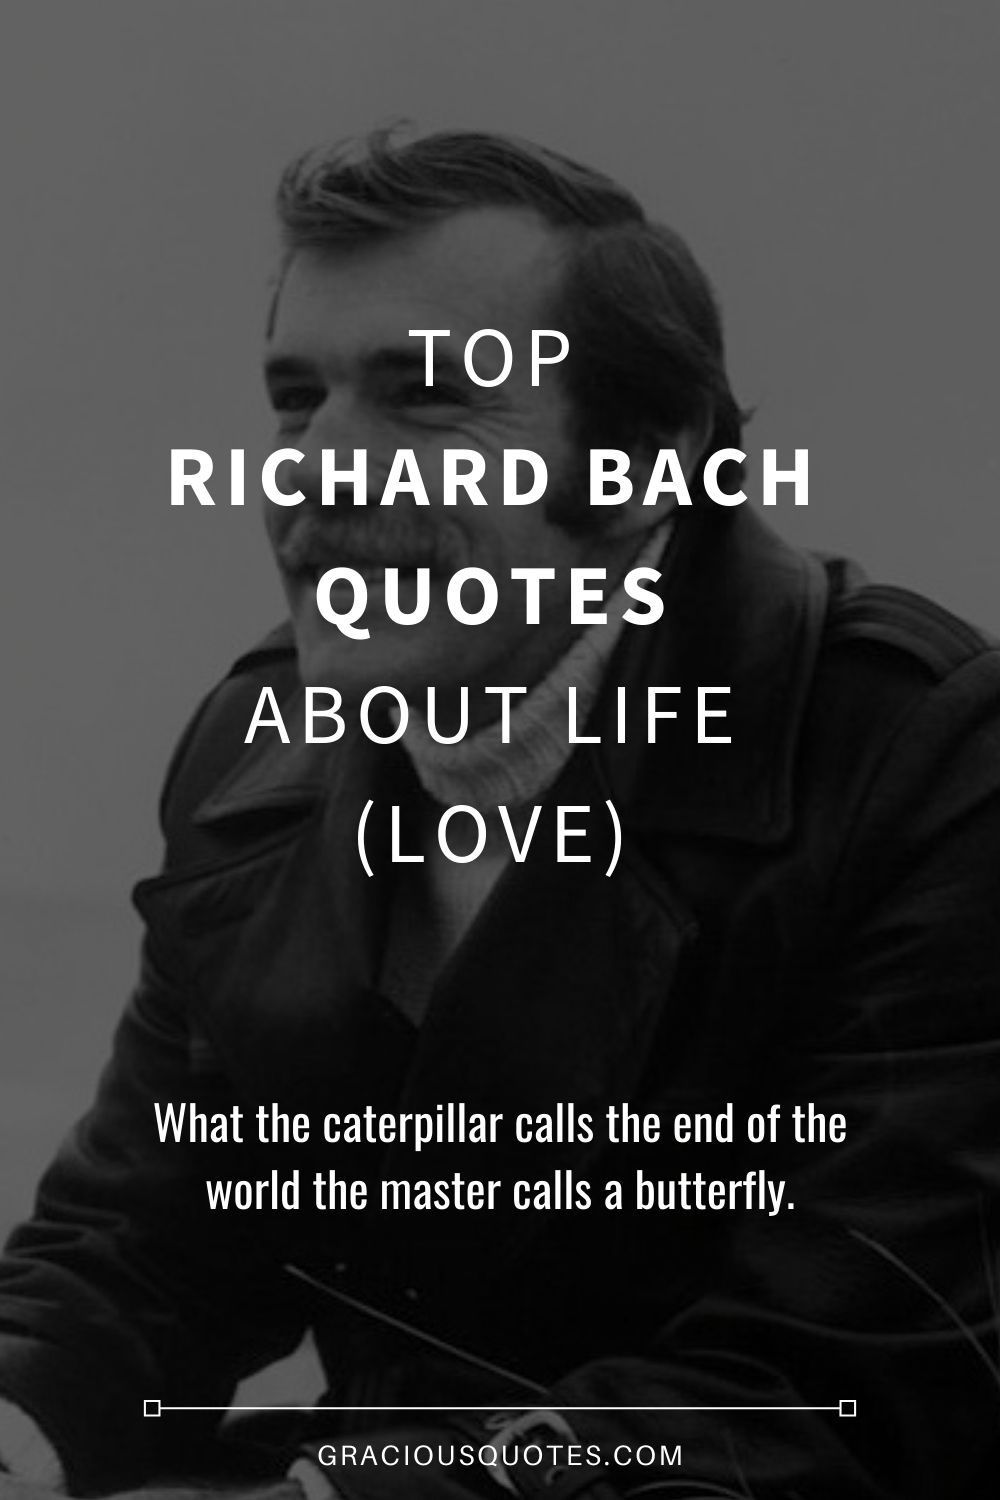 Top Richard Bach Quotes About Life (LOVE) - Gracious Quotes